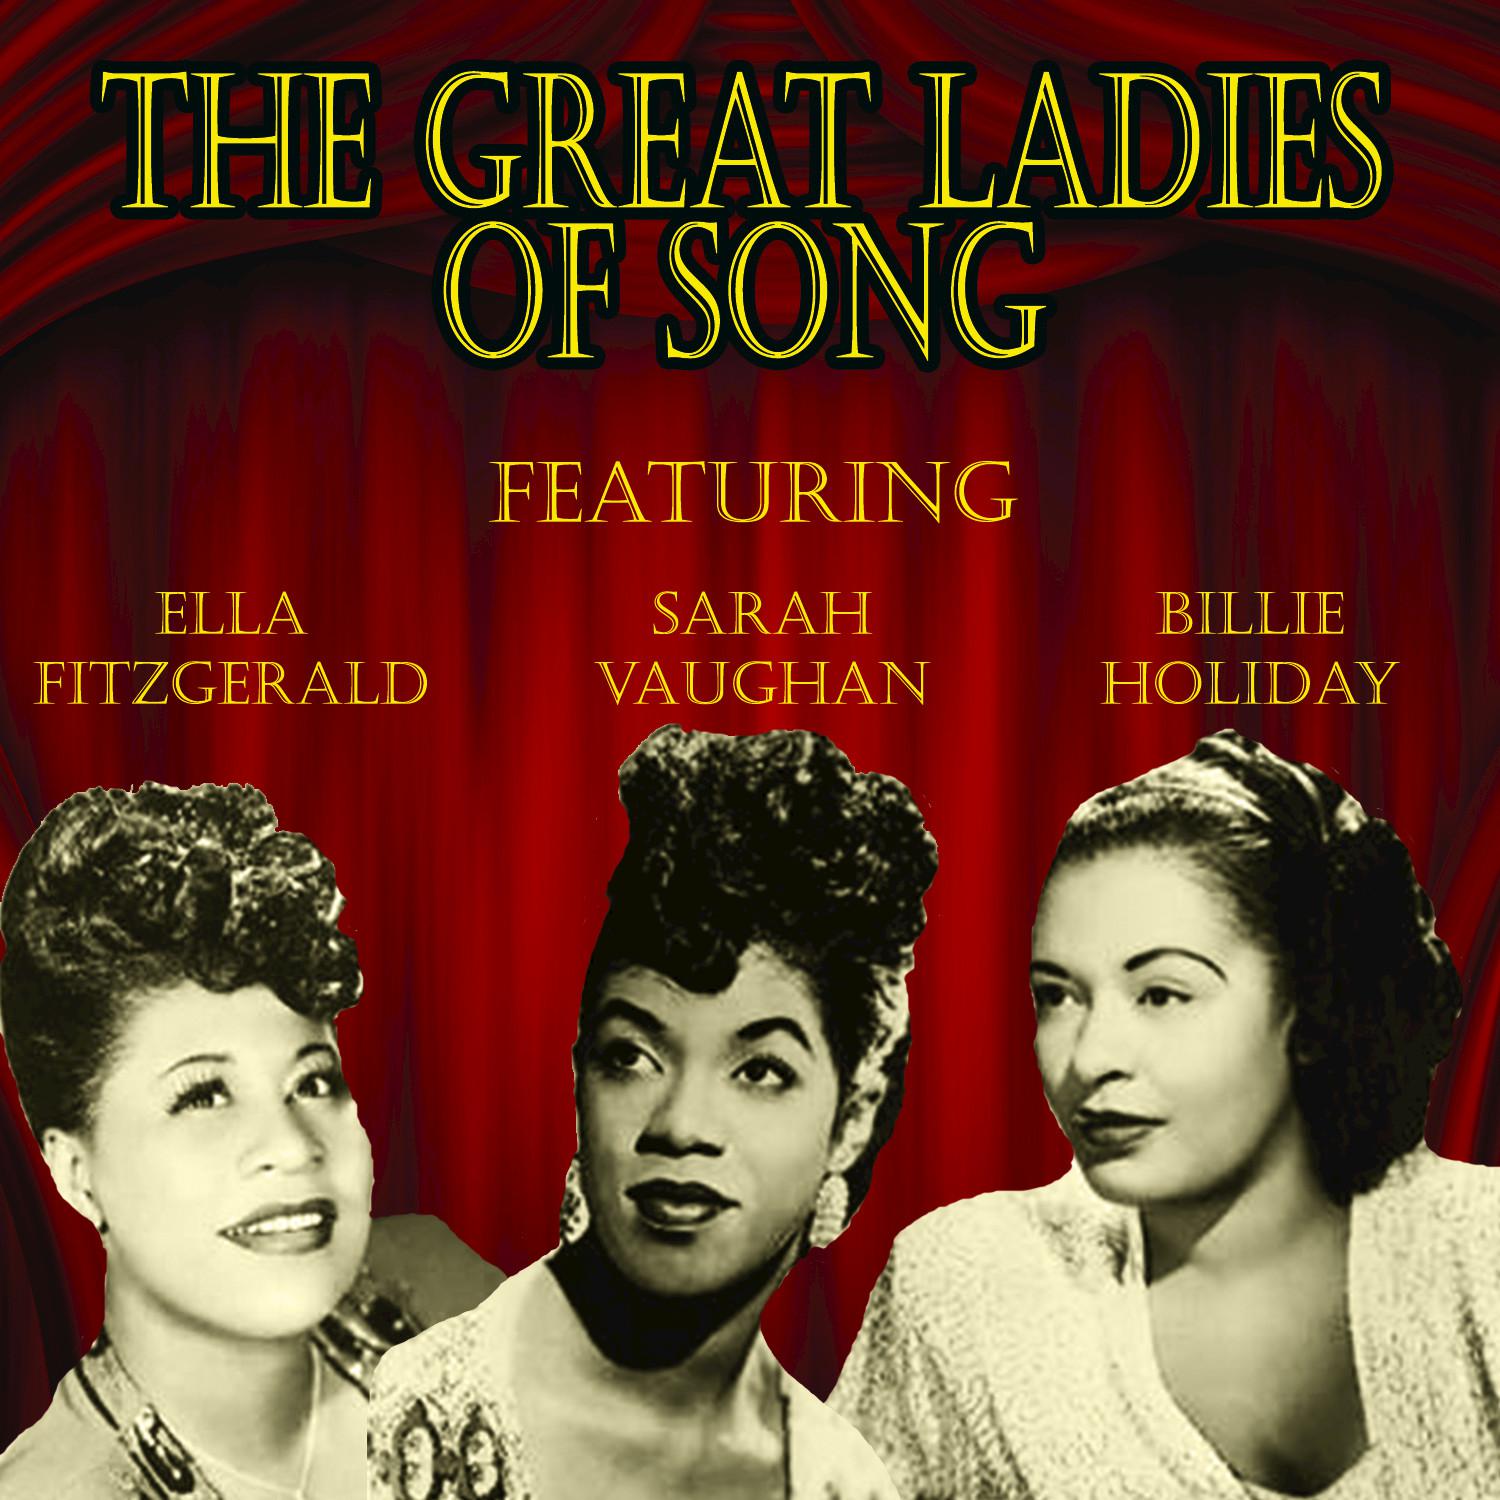 The Great Ladies of Song